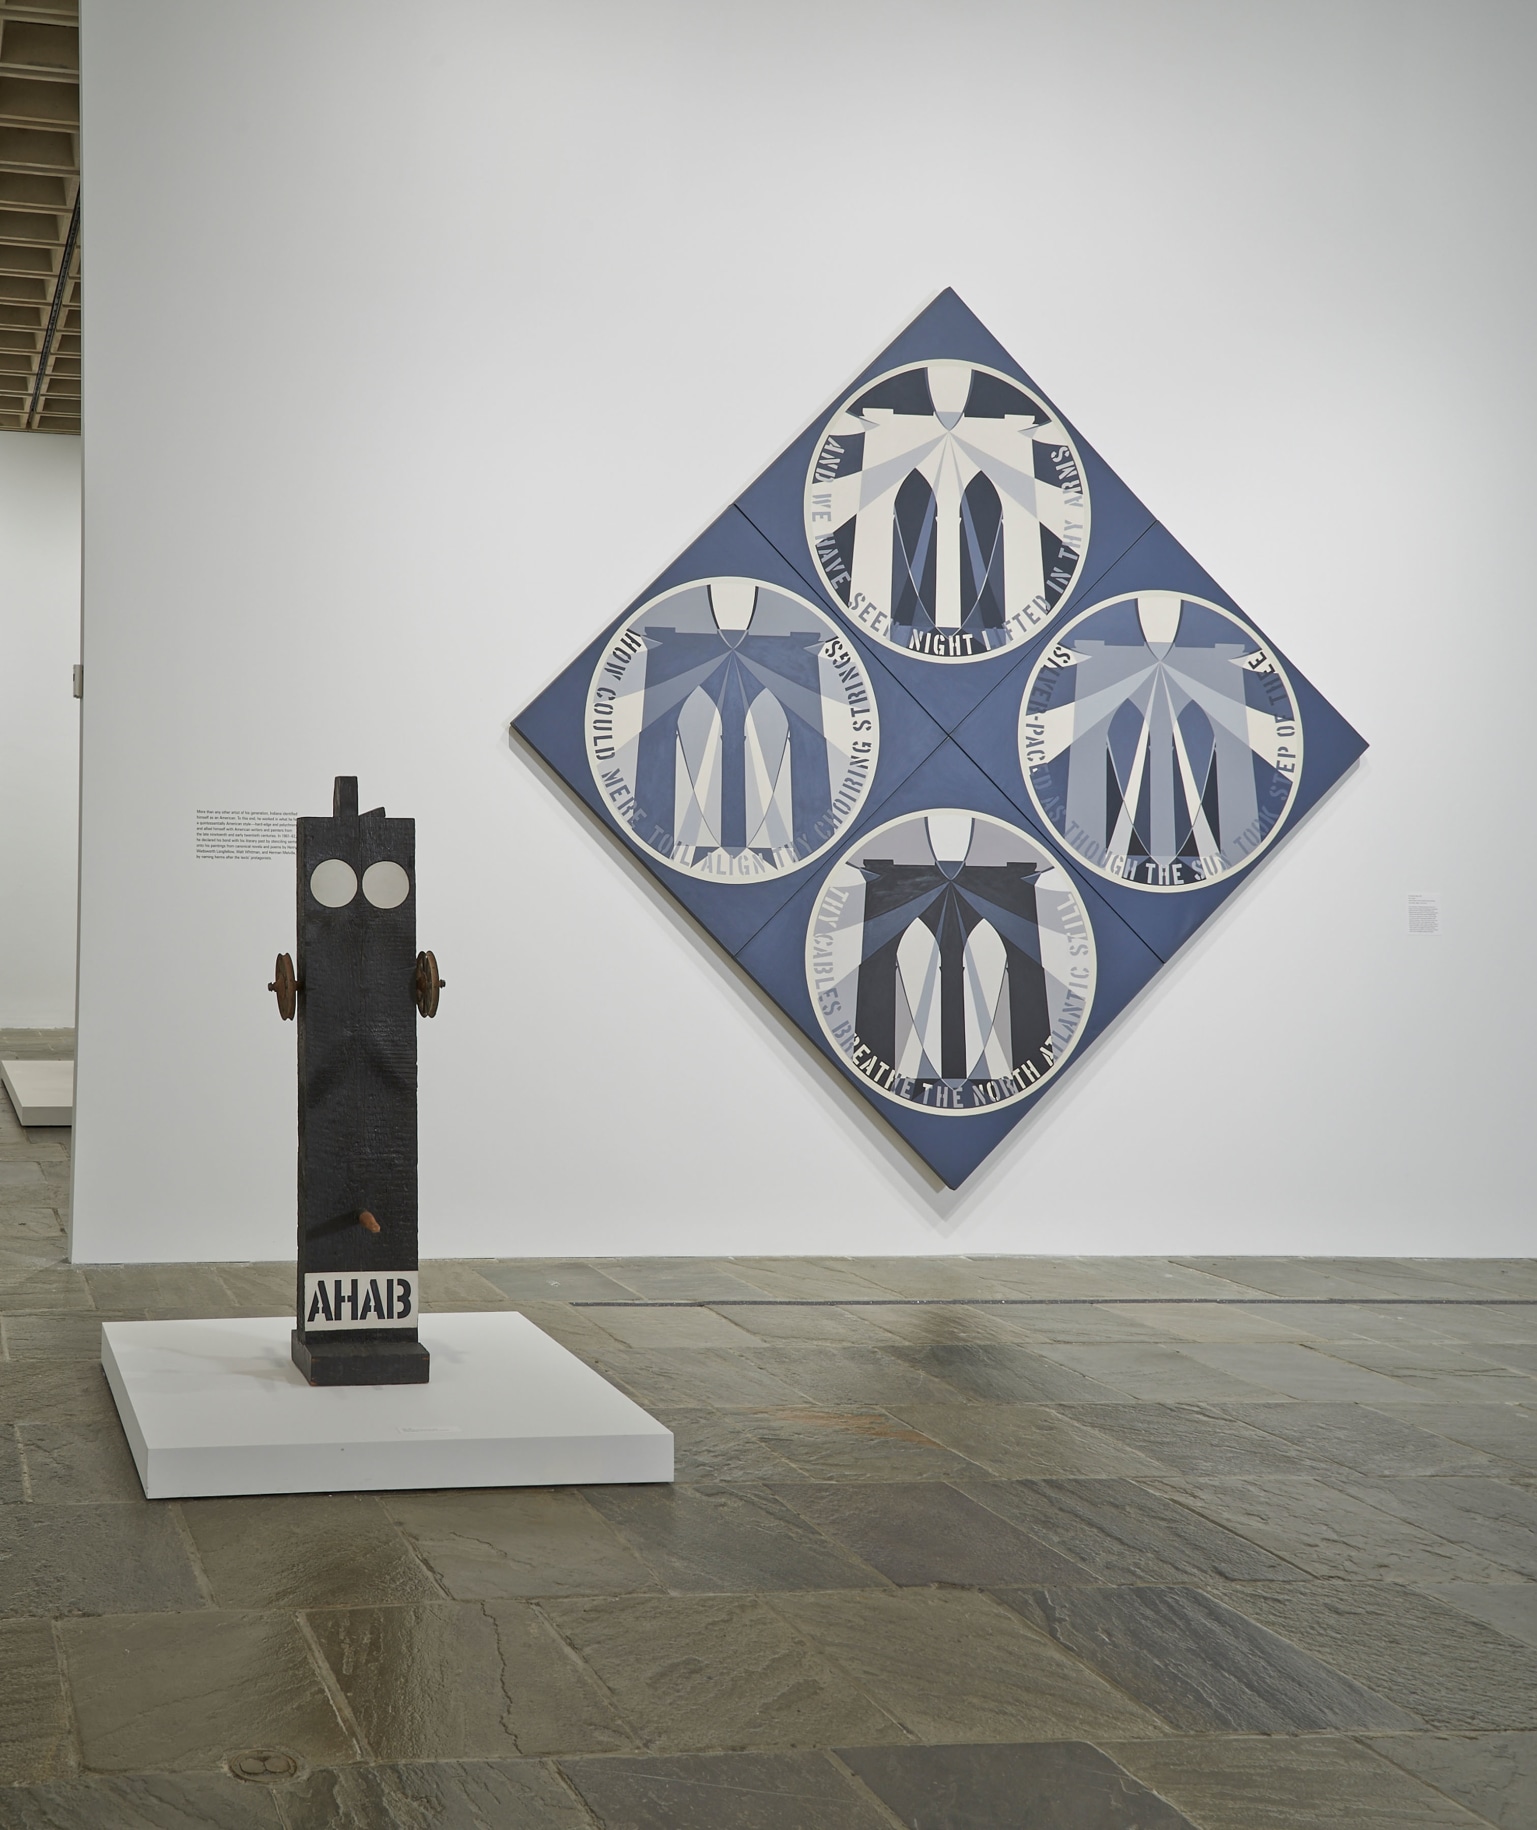 Installation view of Robert Indiana: Beyond LOVE, Whitney Museum of American Art, New York, September 26, 2013&ndash;January 5, 2014. Left to right, Ahab (1960&ndash;62) and The Brooklyn Bridge (1964), &nbsp;